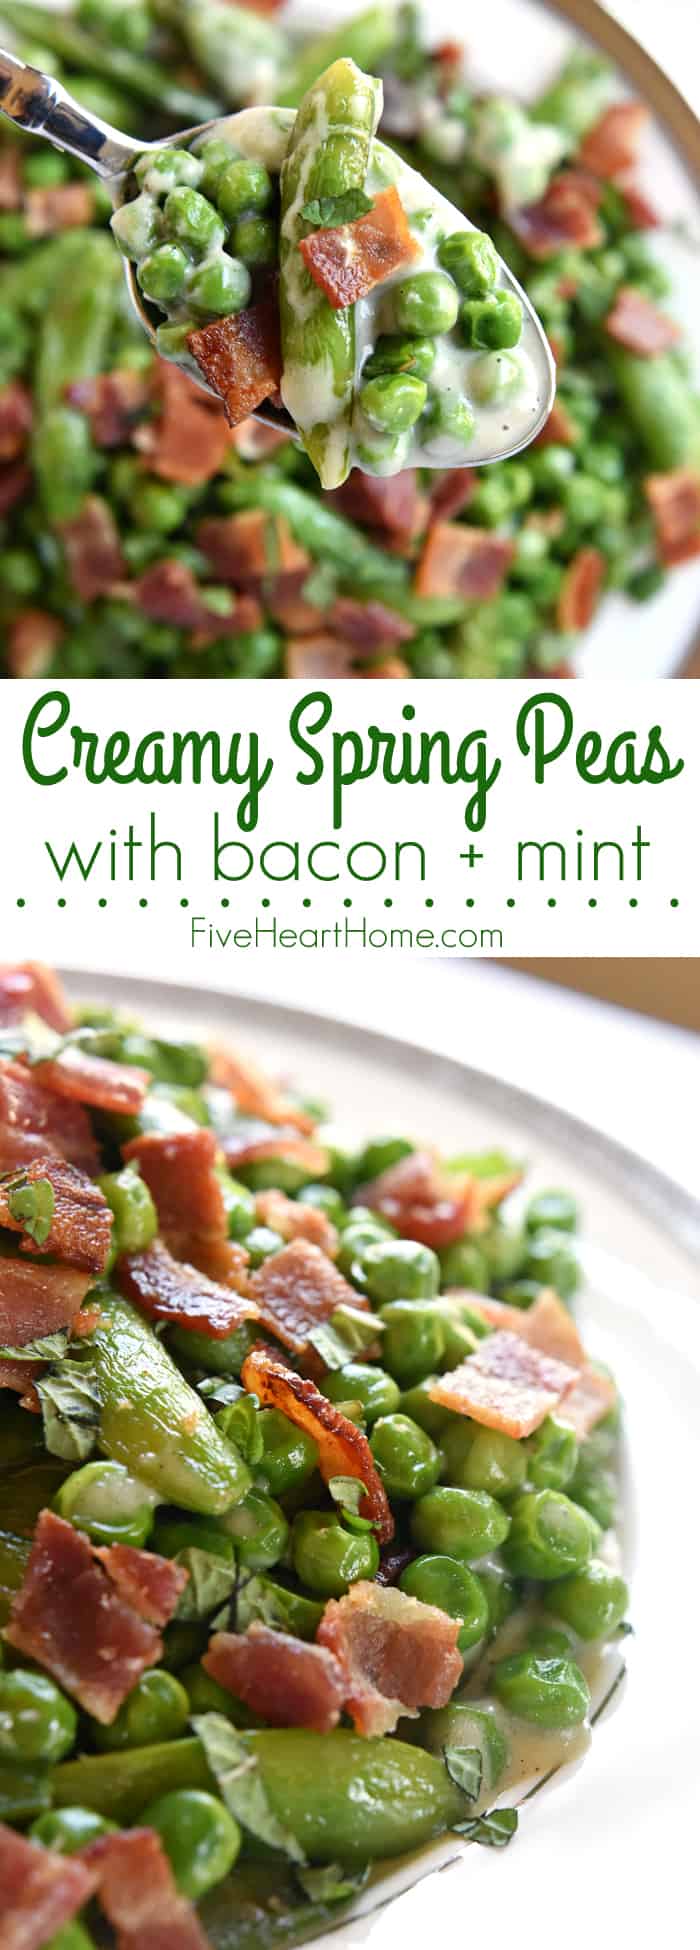 Creamed Peas with Bacon + Mint ~ this ultimate Easter side dish features a delicious combo of flavors and textures from sweet green peas, fresh sugar snaps, salty bacon, a decadent cream sauce, and refreshing pops of mint | FiveHeartHome.com via @fivehearthome